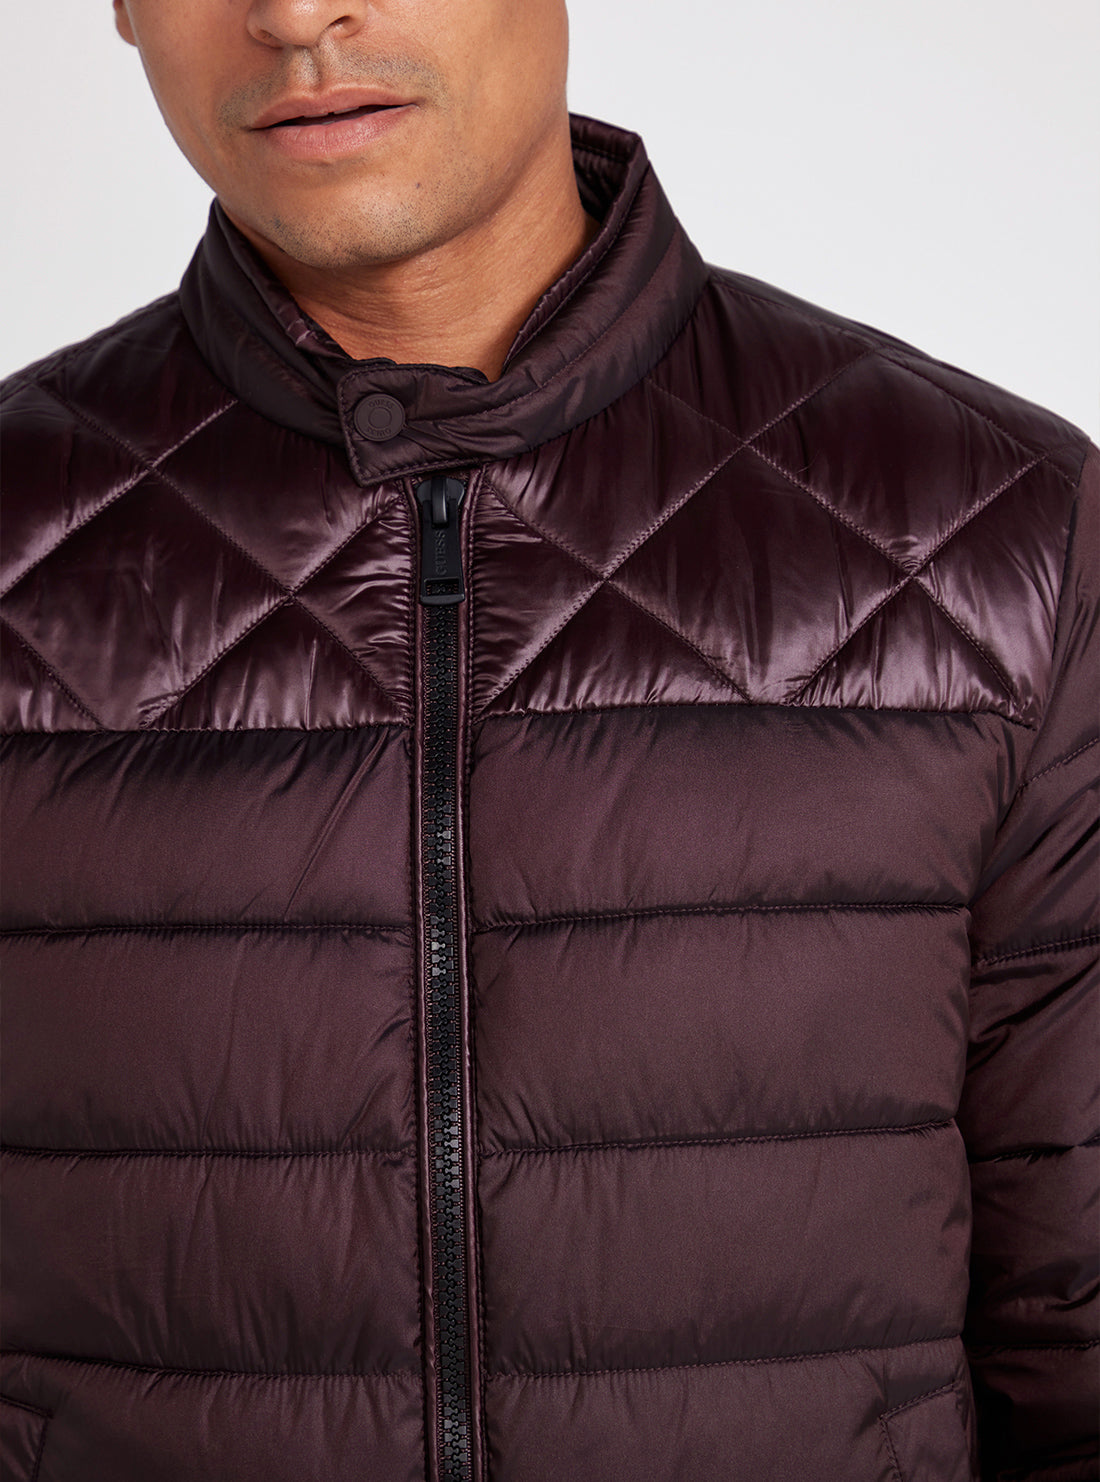 Eco Maroon Lightweight Puffer Jacket | GUESS men's apparel | front detail view